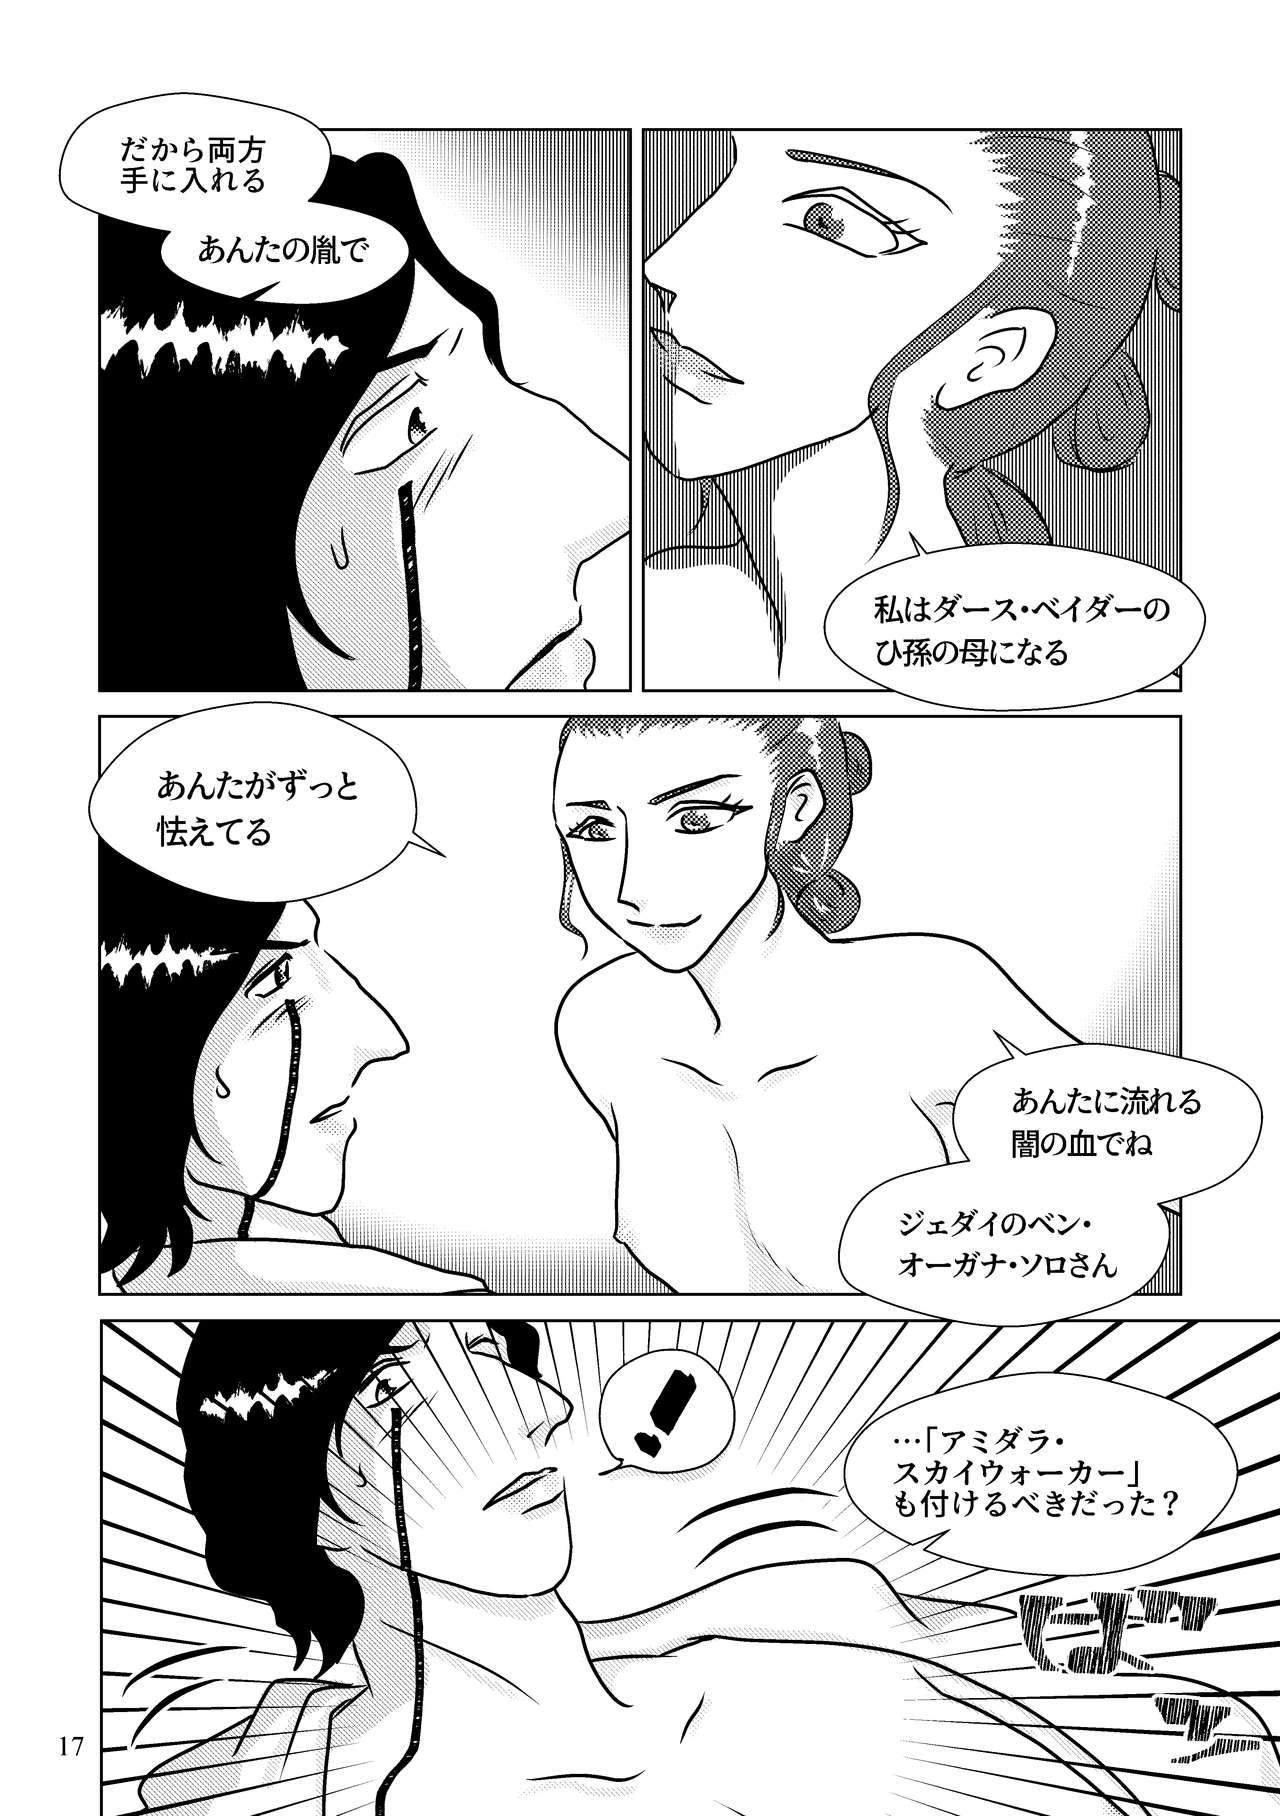 Negao Nothing But You Ch. 1-9 - Star wars Women Sucking - Page 7